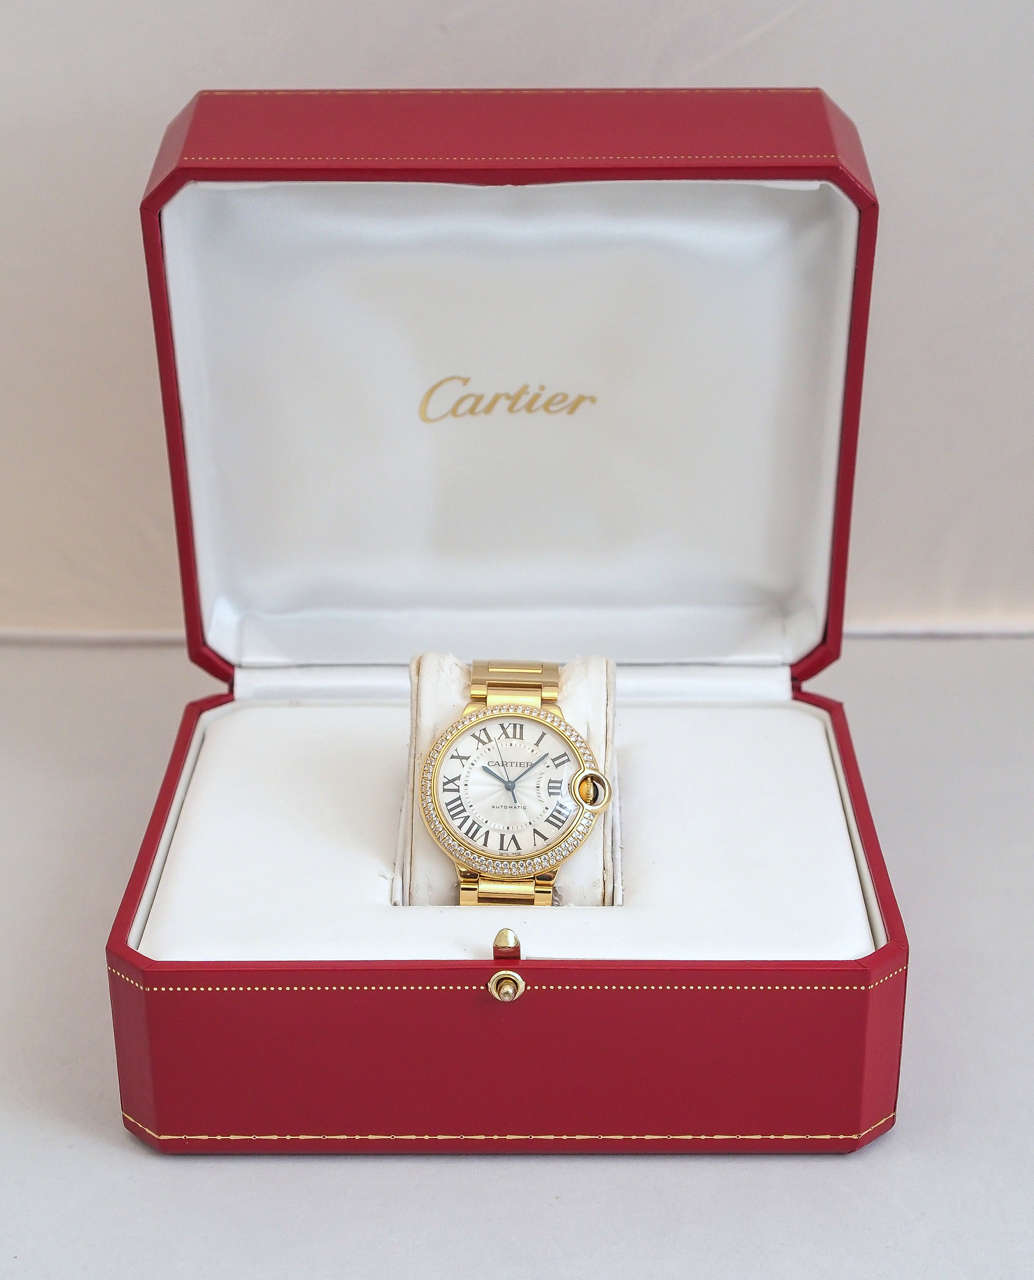 Cartier 18k yellow gold and diamond Ballon Bleu wristwatch, Ref. WE9004Z3, serial number 82288PX 3002
Dial: Silvered dial, Roman numerals, diamonds on the bezel, blued-steel sword hands, gold crown set with a blue cabochon sapphire
Features: